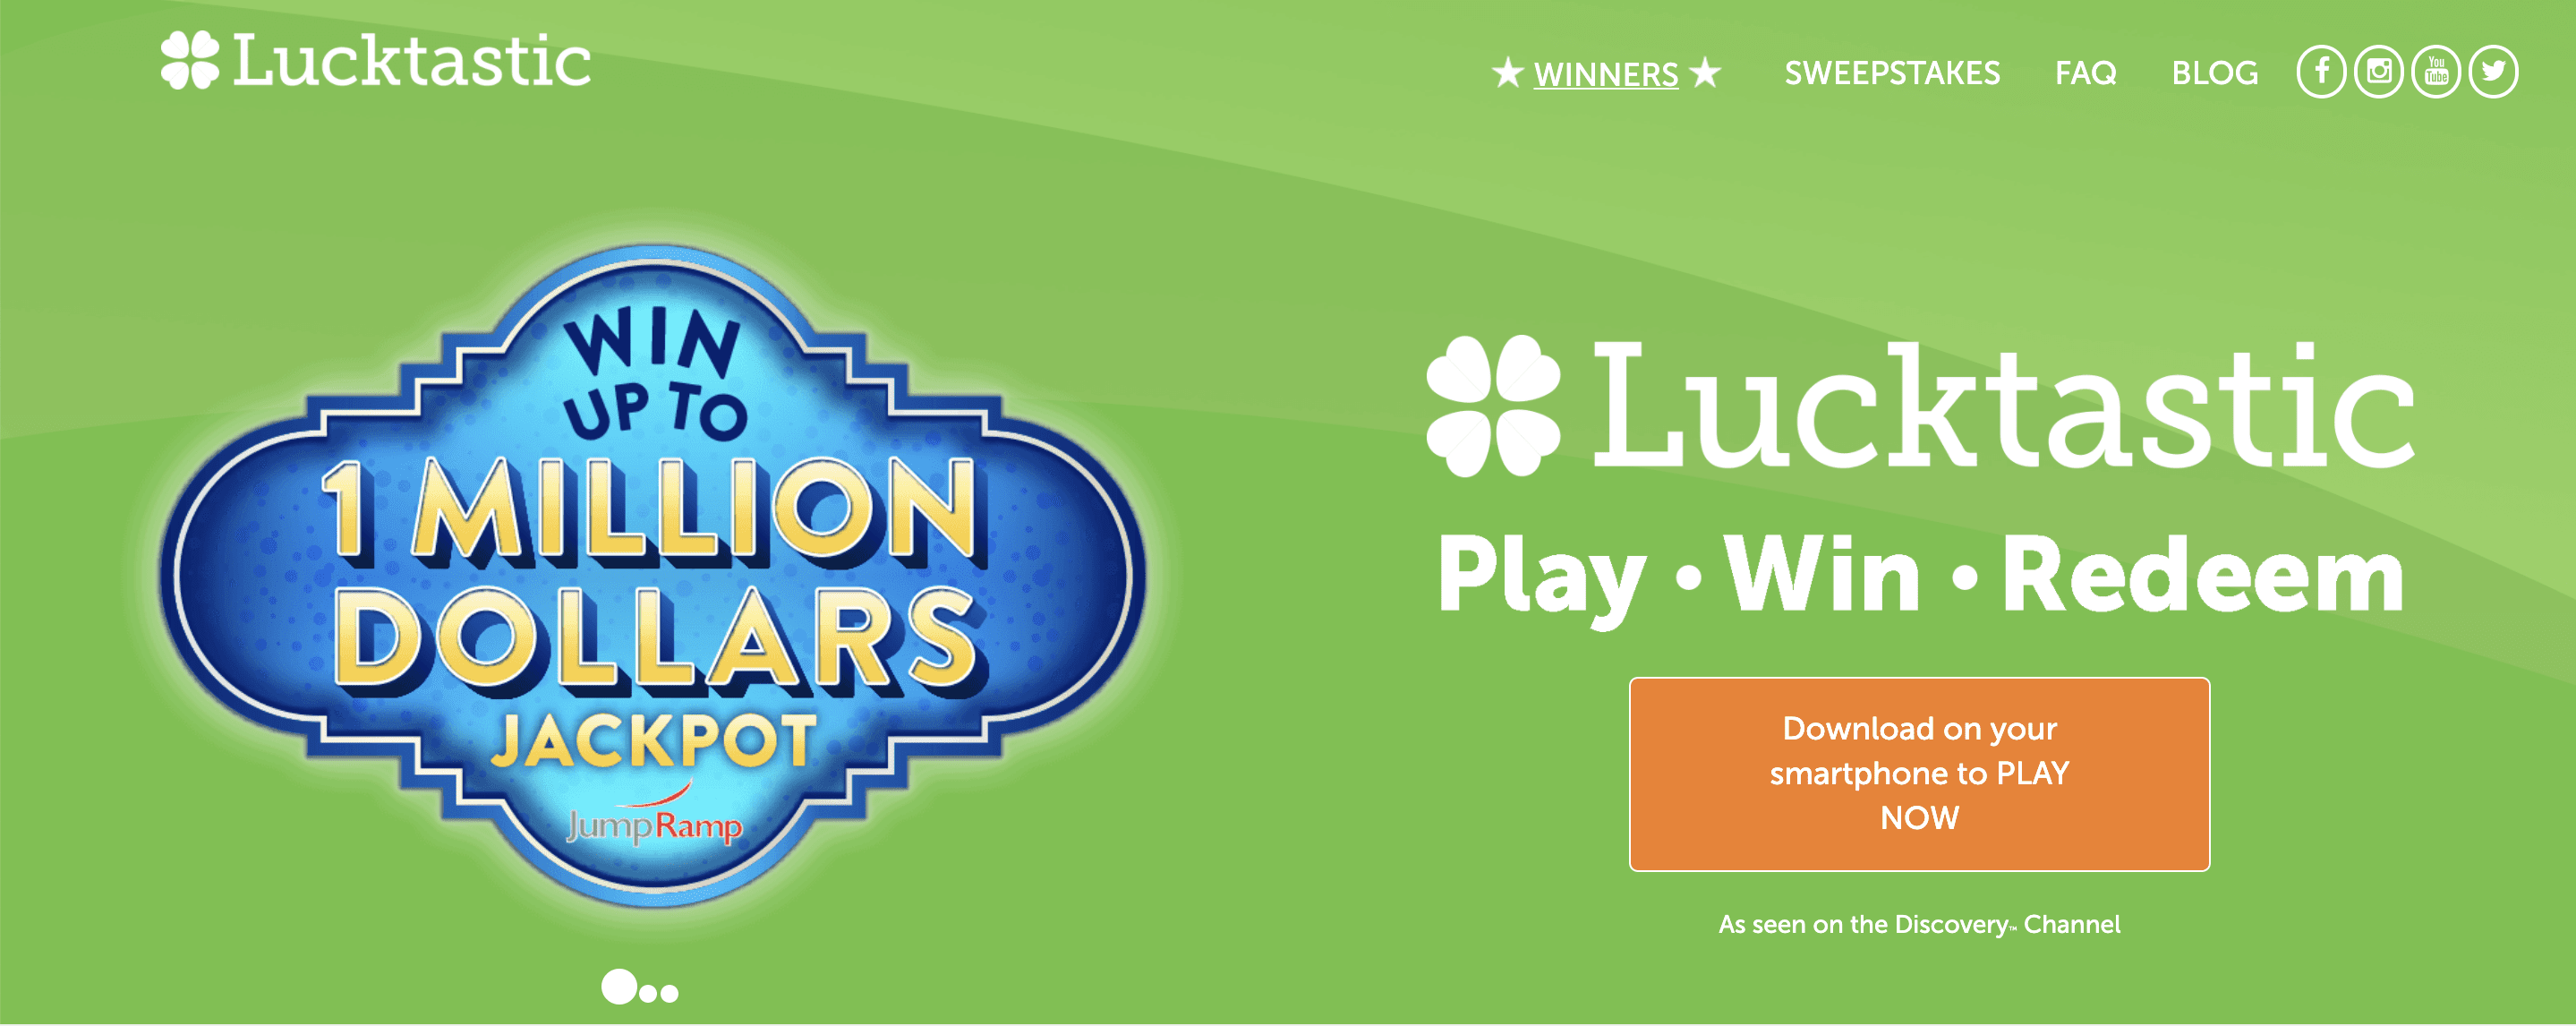 Lucktastic: How To Make 50 Dollars Fast